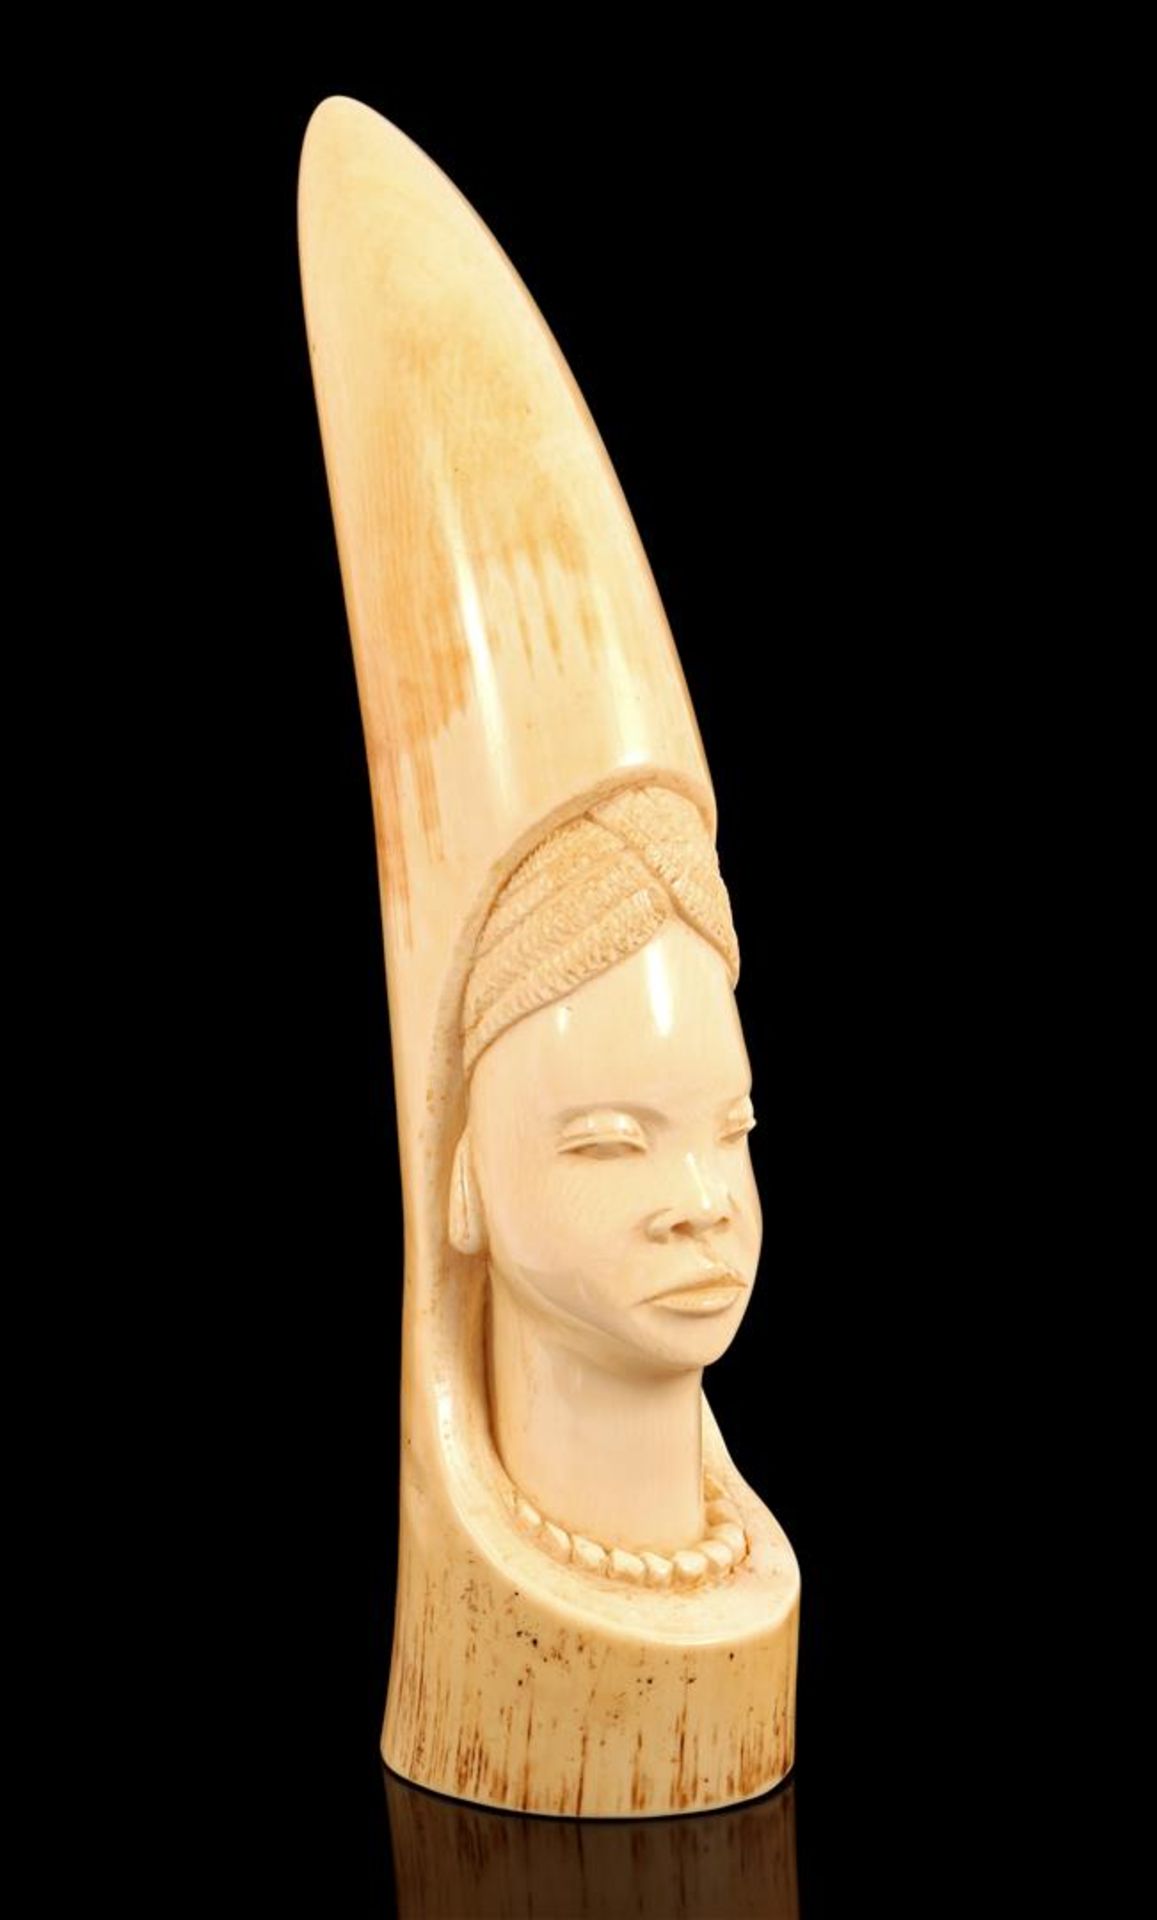 Richly carved ivory decorative object with the face